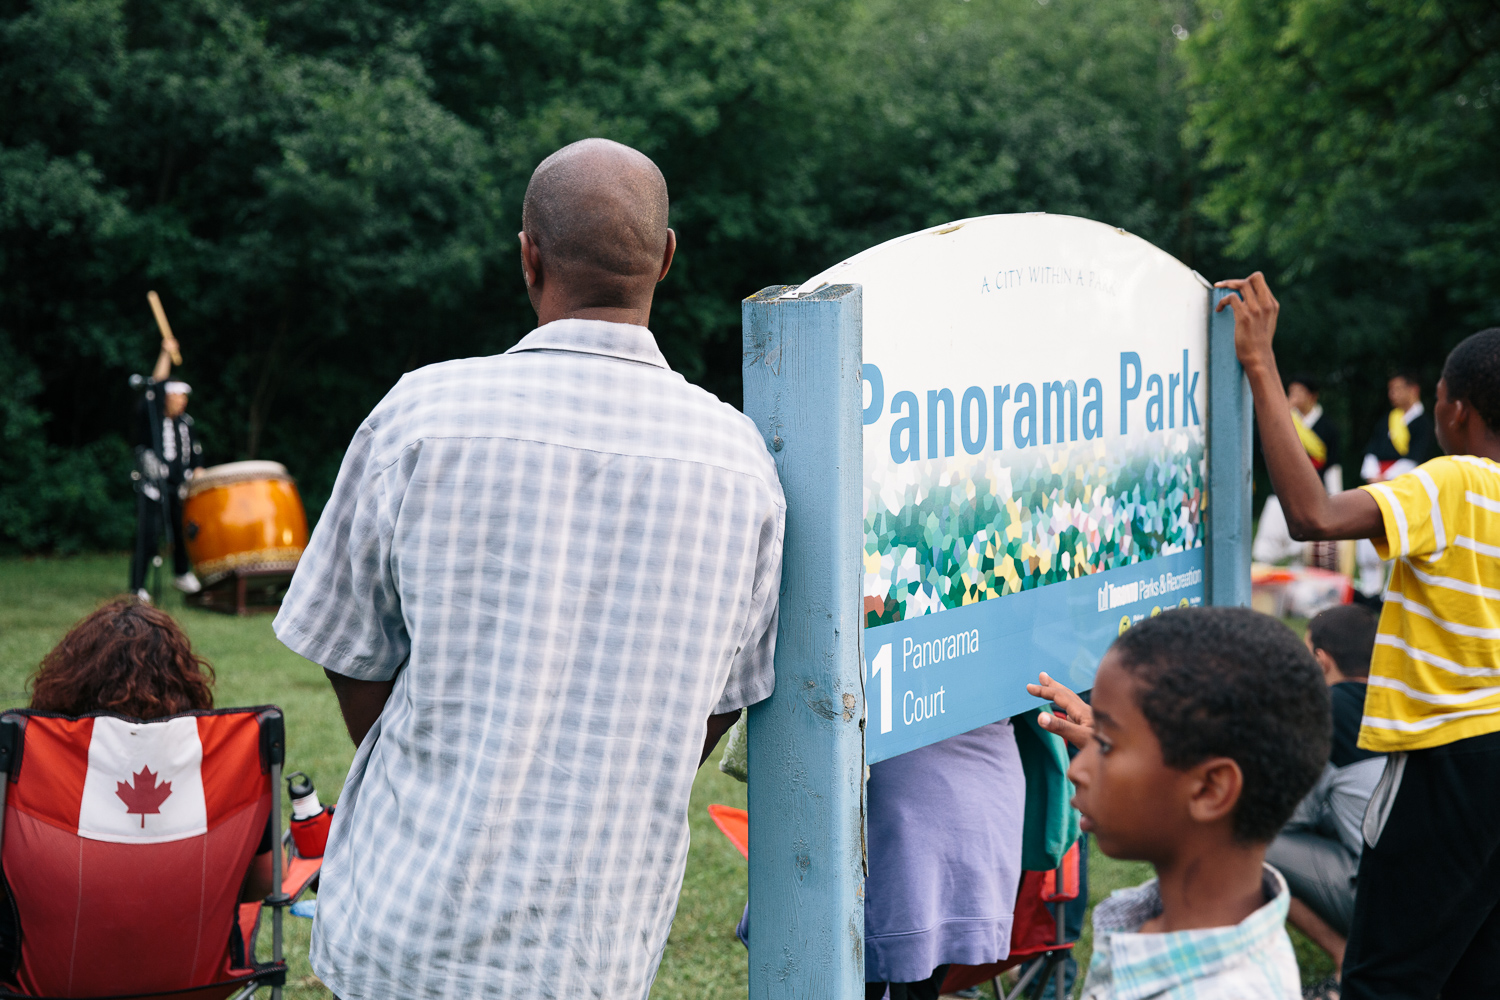 A man leans against a park sign for Panorama Park next to other audience members.